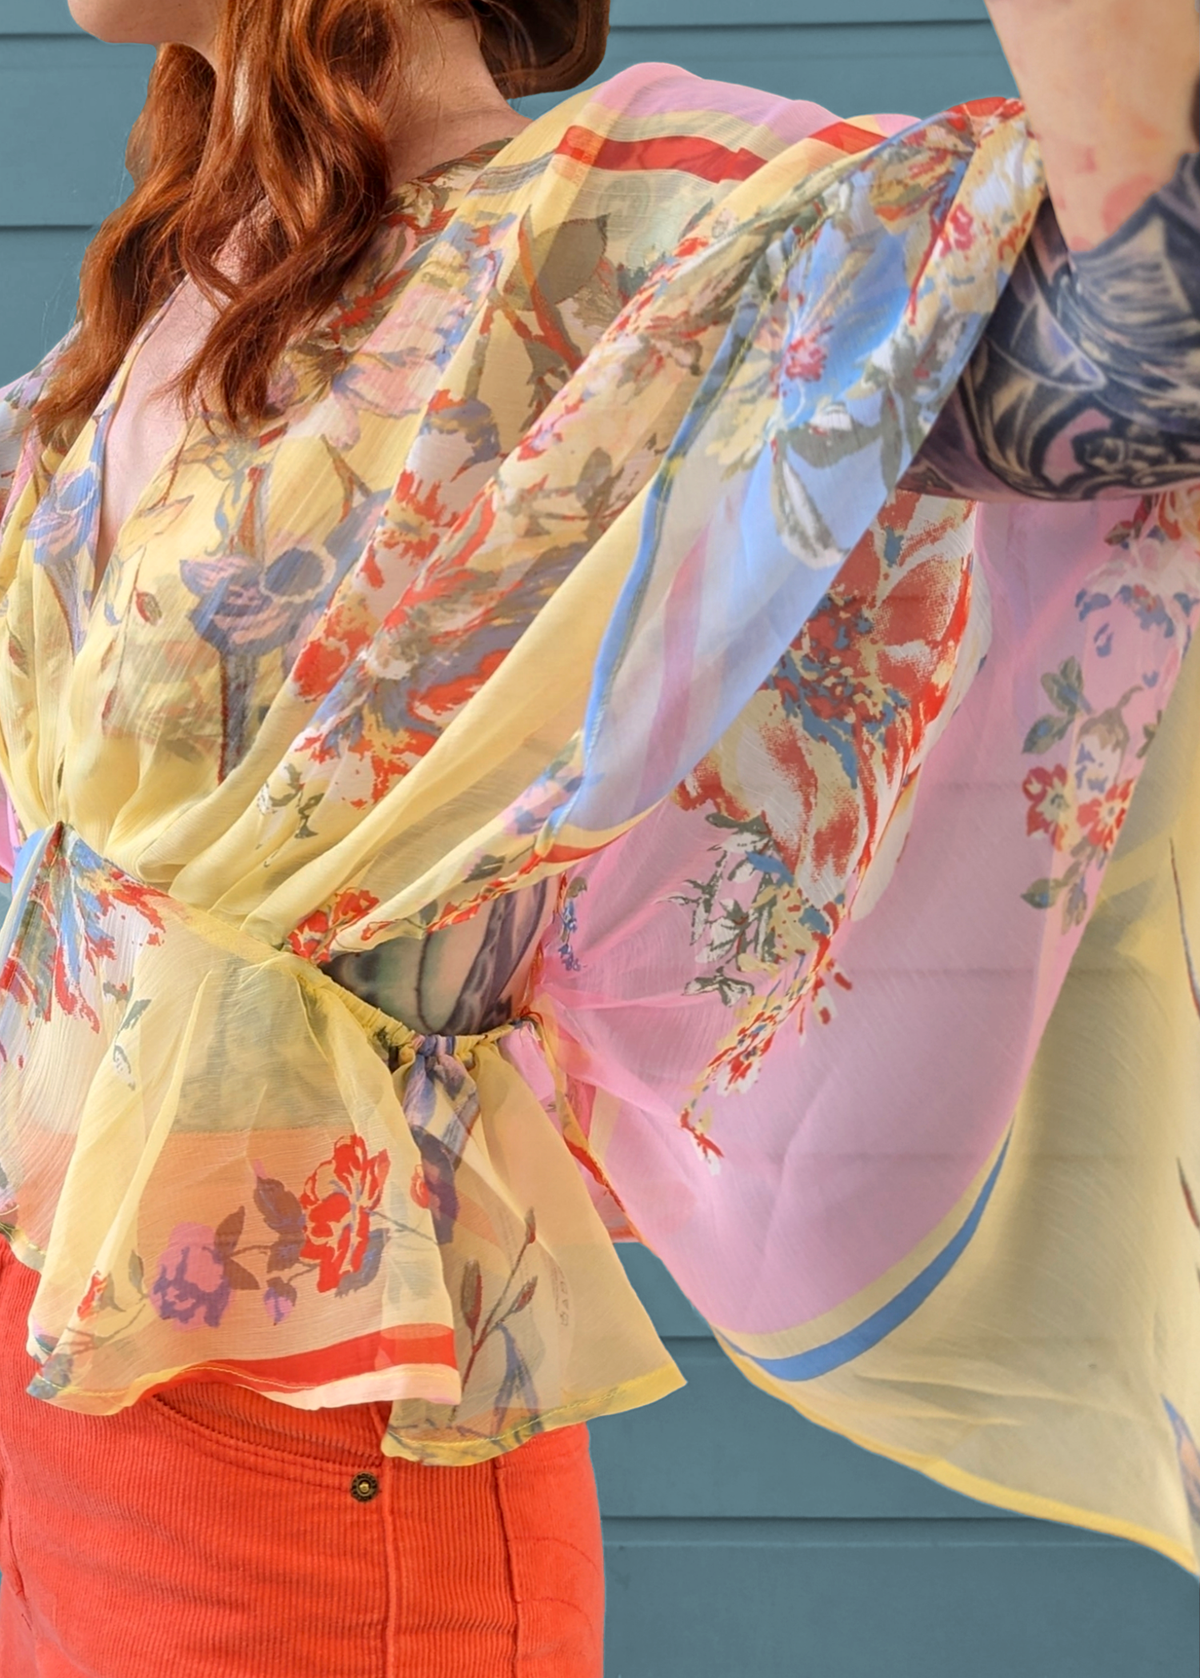 70s inspired dreamy floaty chiffon batwing cape top in yellow, pink, and blue floral by Band of the Free